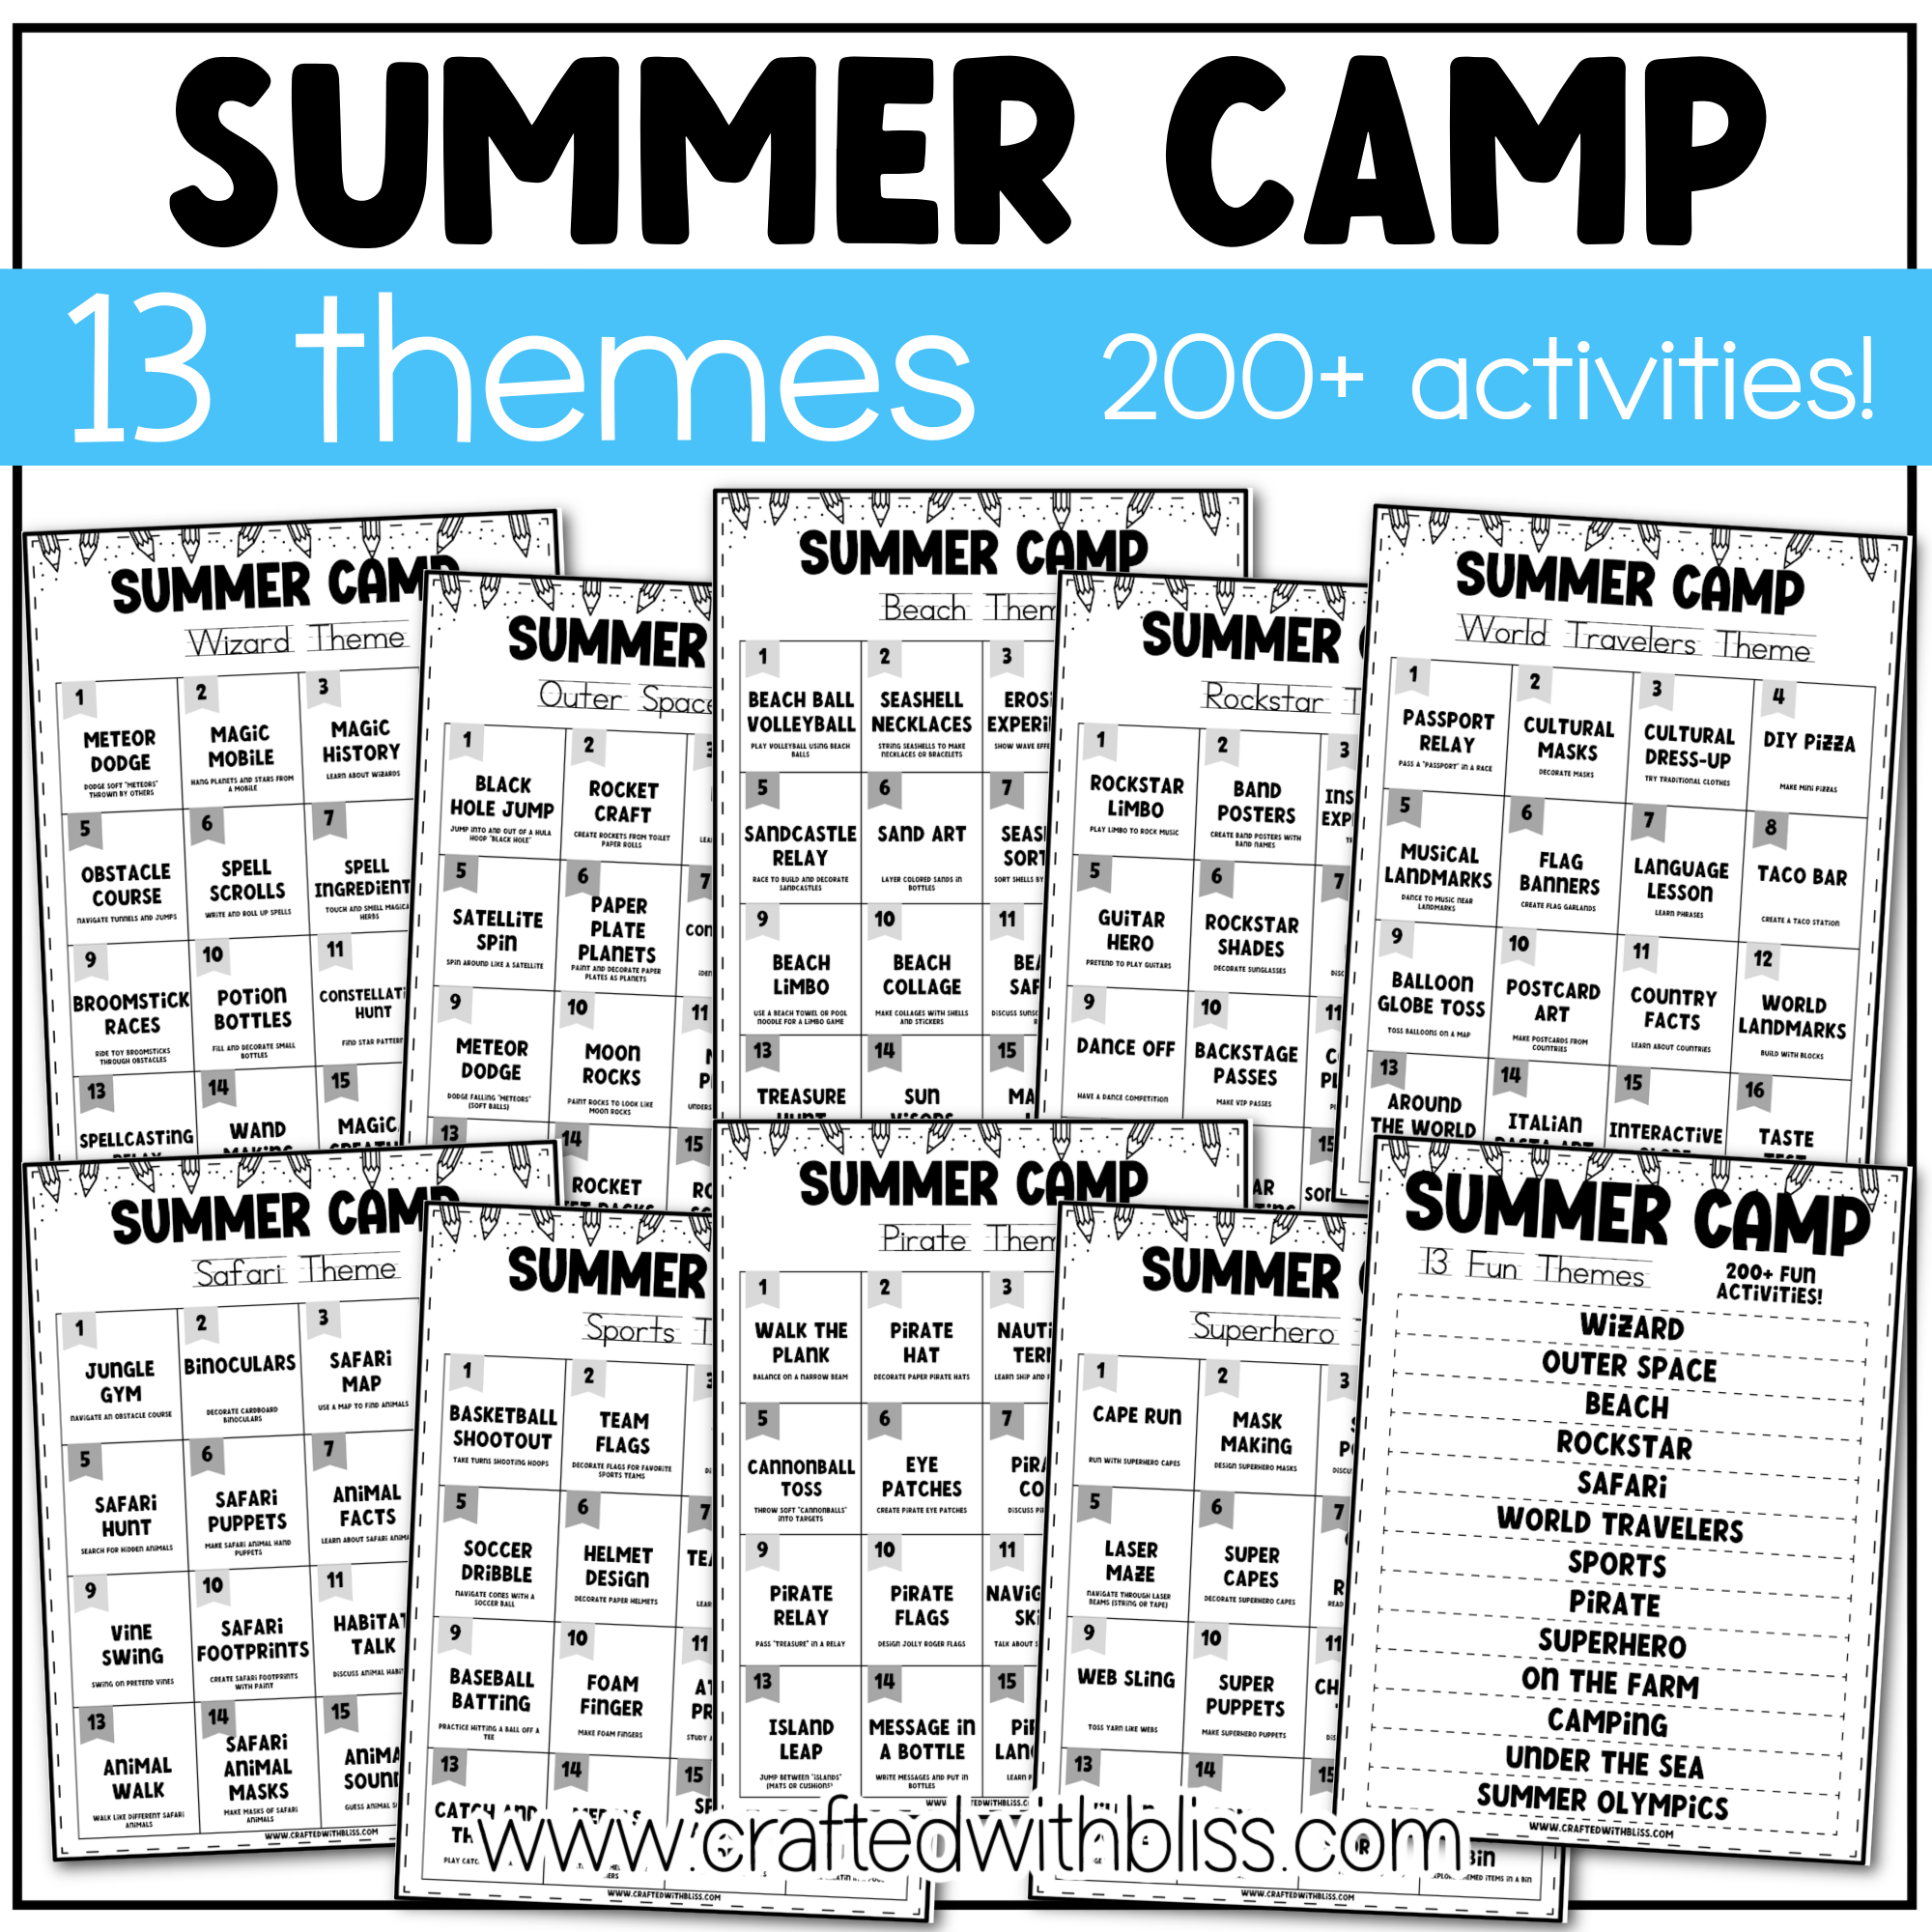 FREE 13 Summer Camp Theme Ideas List For Kids + Blank Template